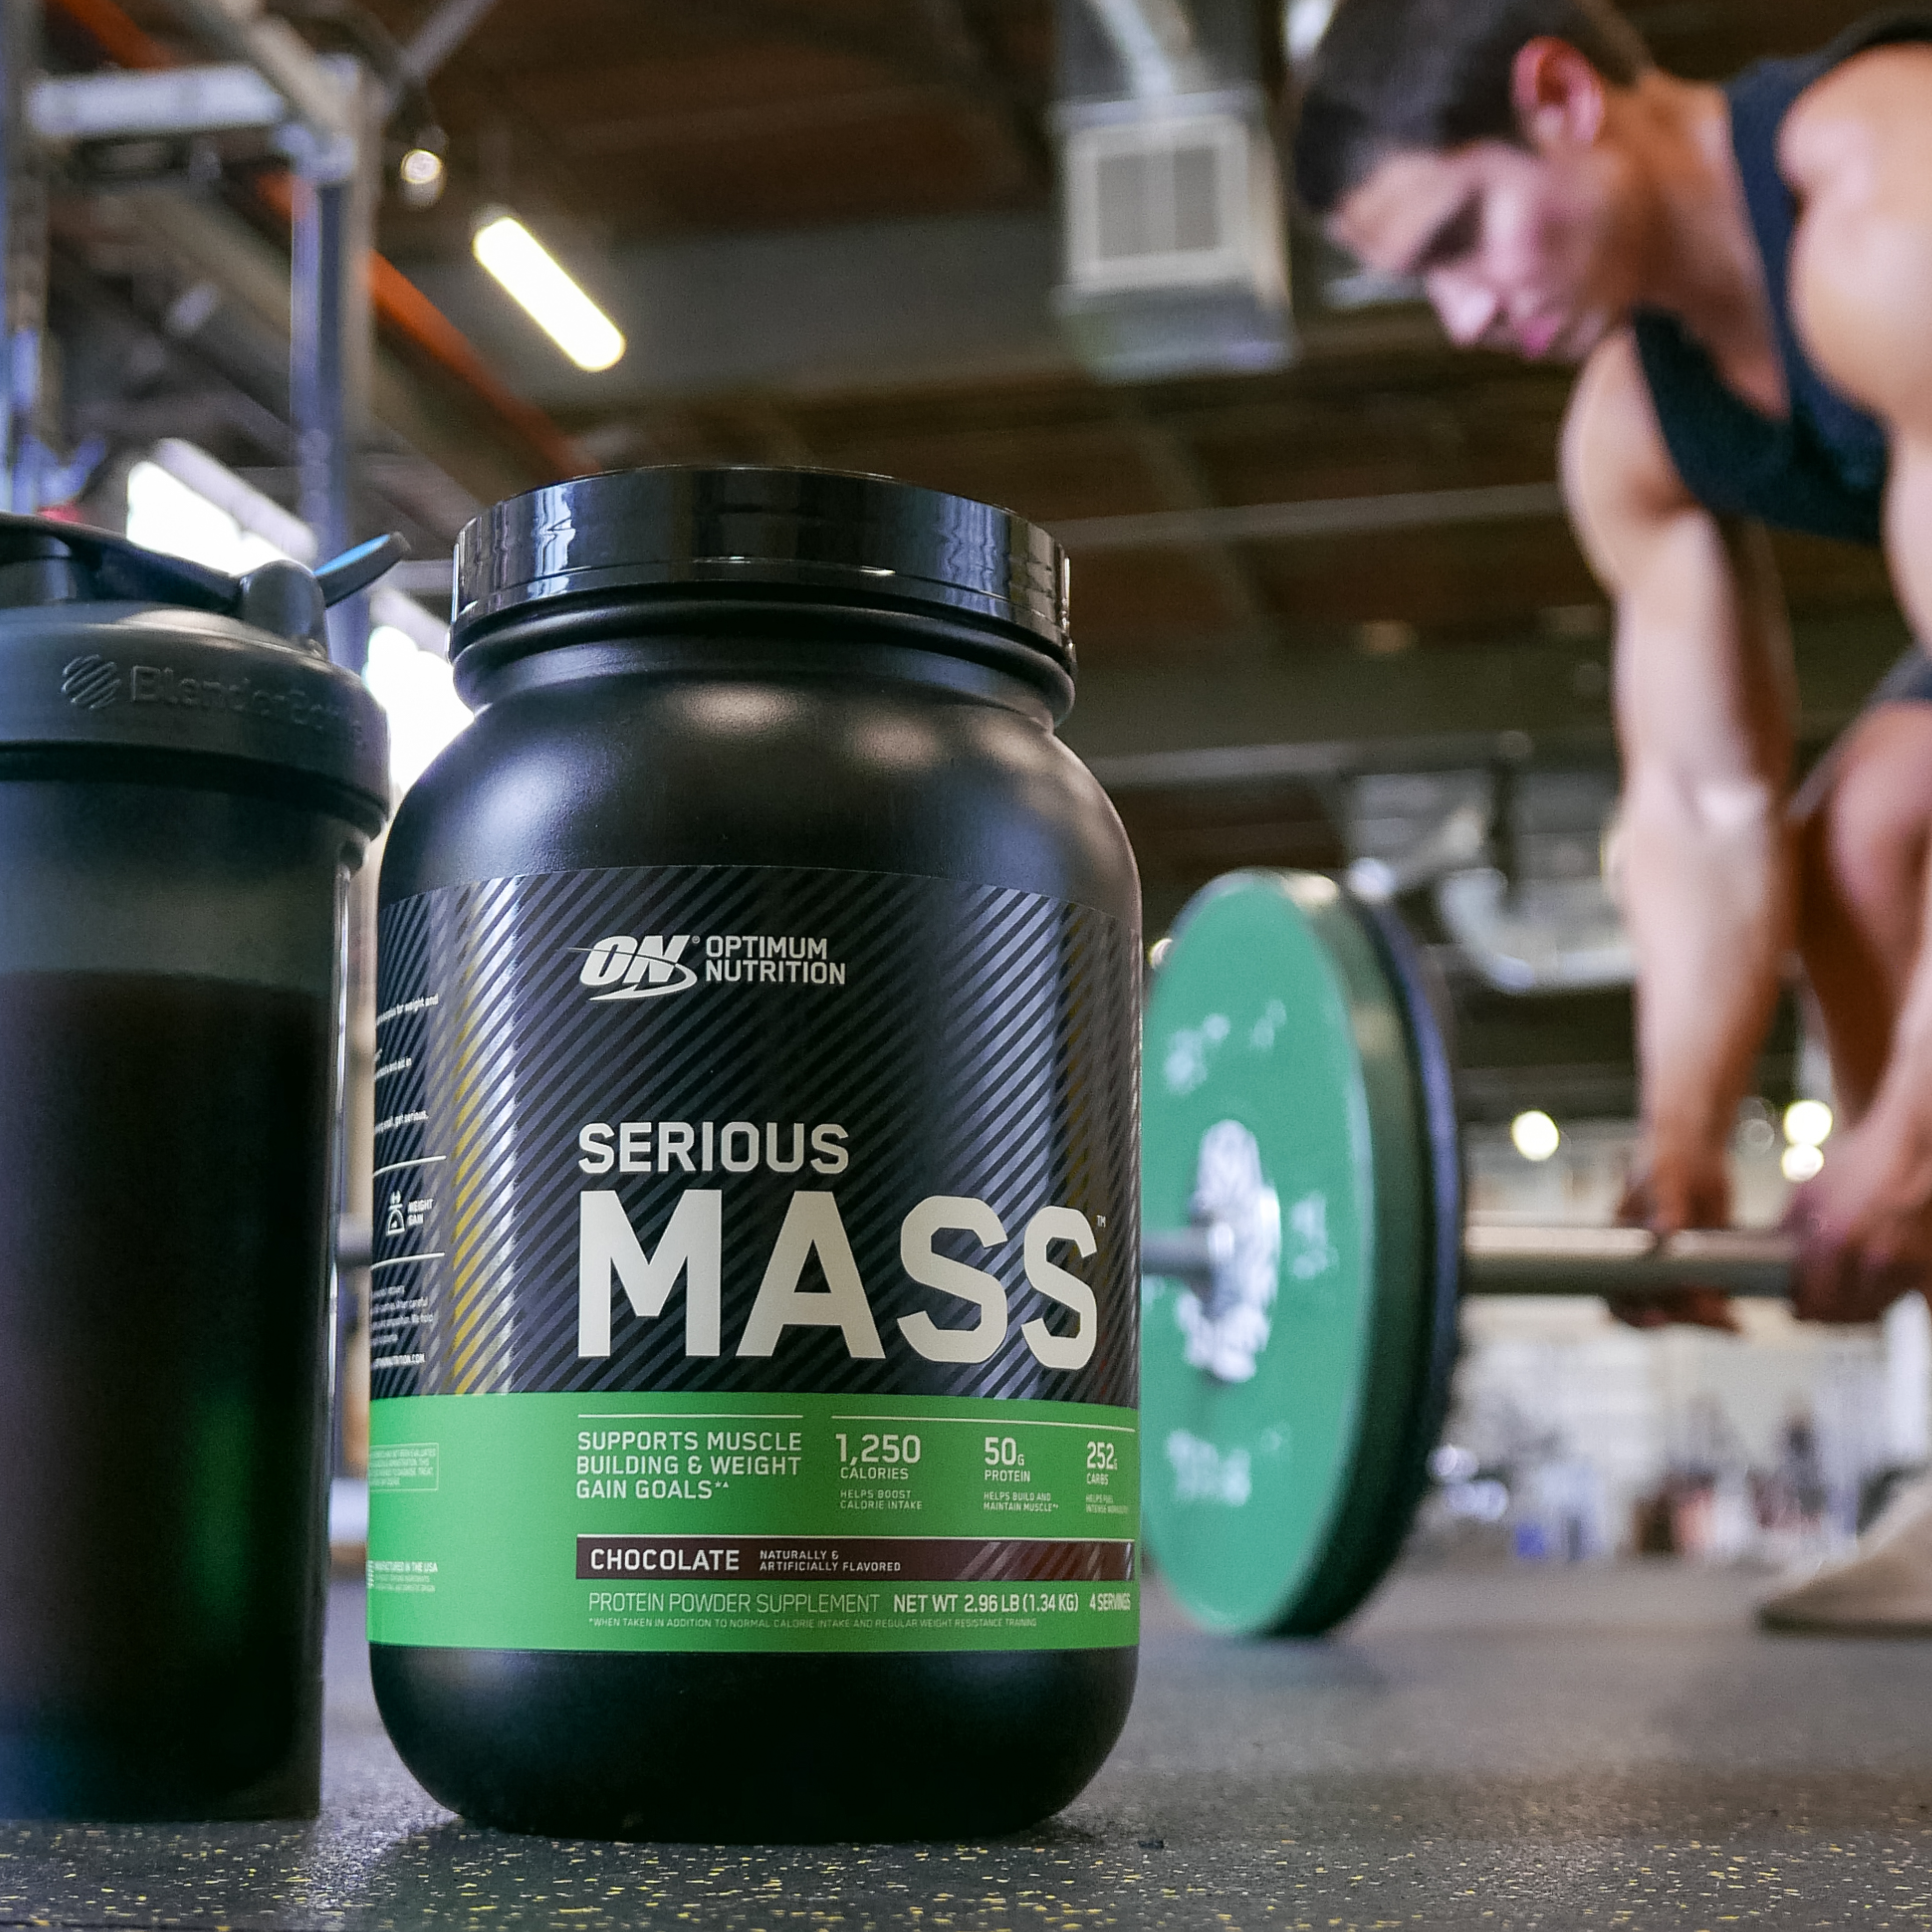 tub of optimum nutrition serious mass and man in background